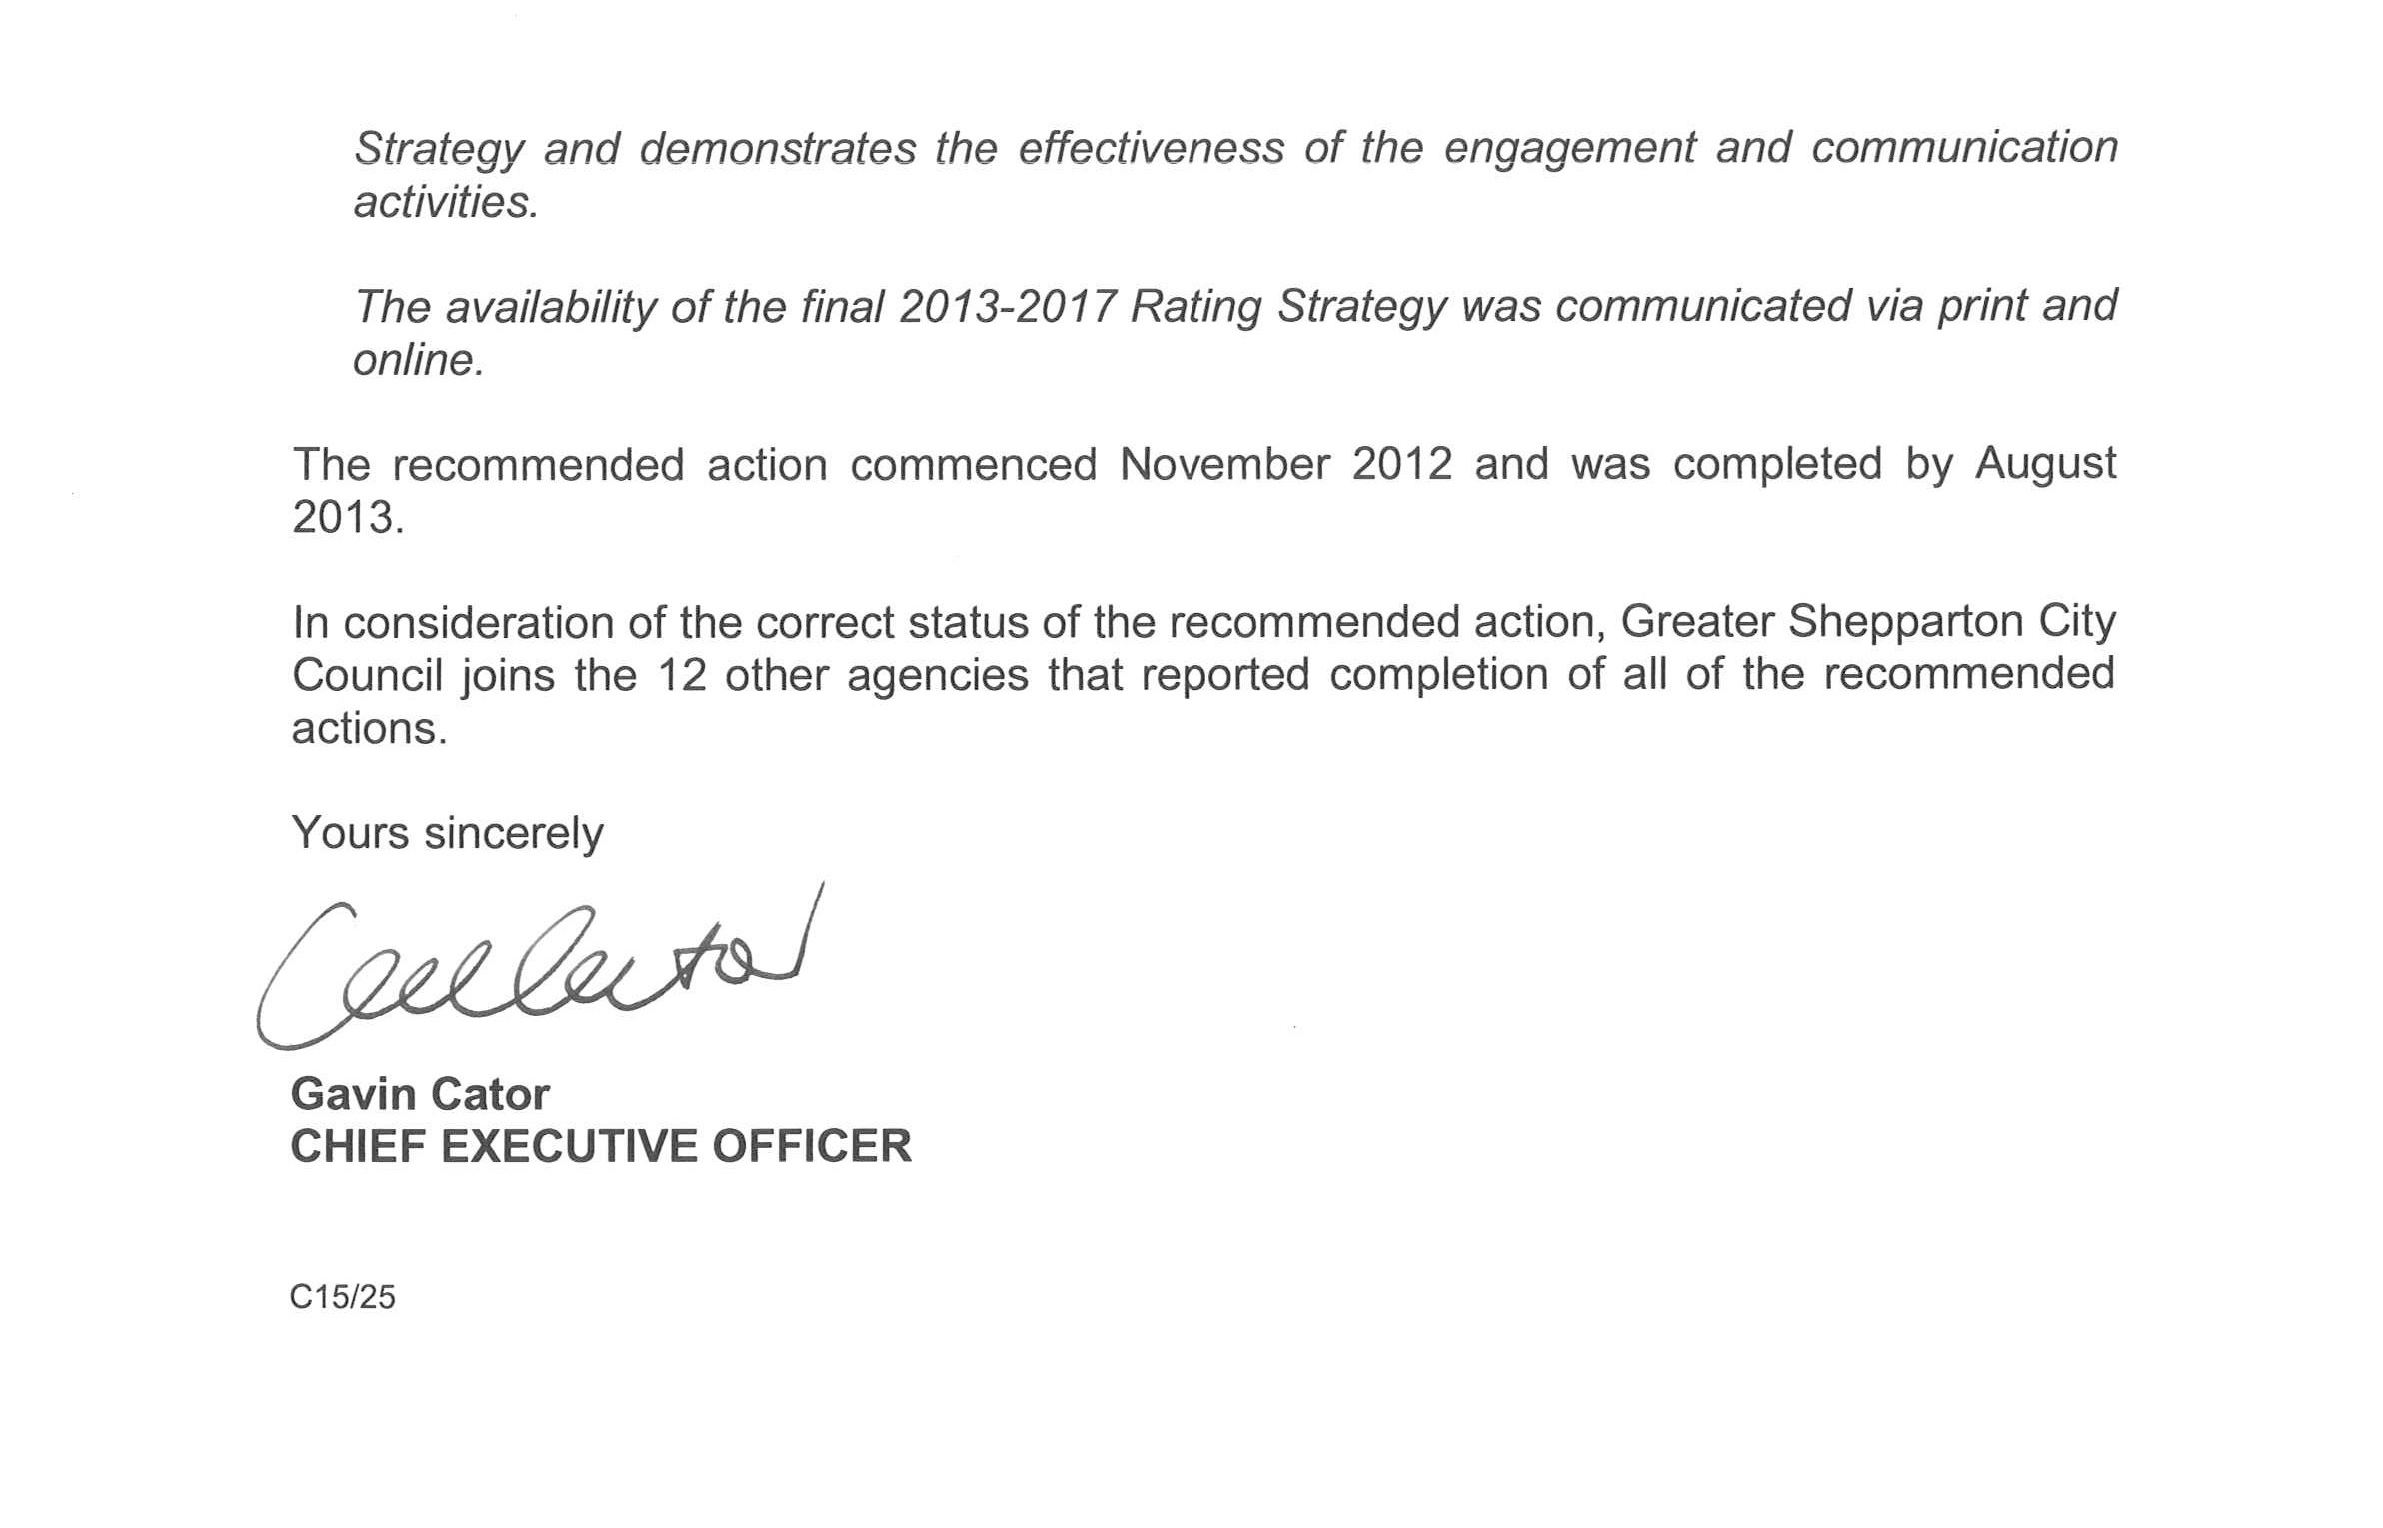 Response provided by the Chief Executive Officer, Greater Shepparton City Council.